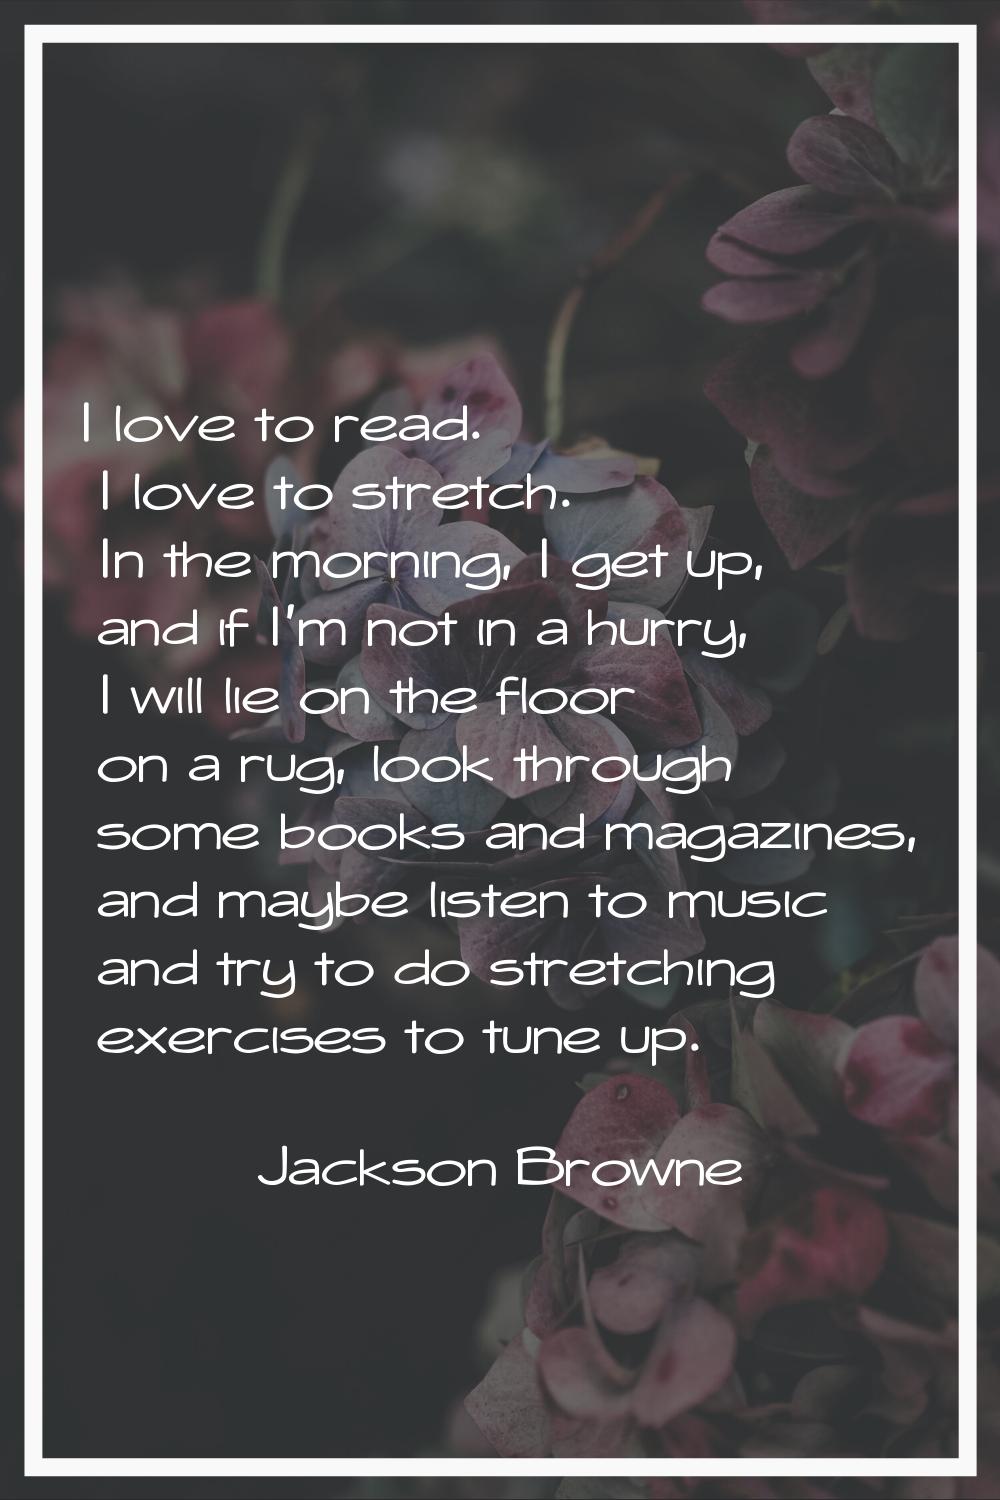 I love to read. I love to stretch. In the morning, I get up, and if I'm not in a hurry, I will lie 